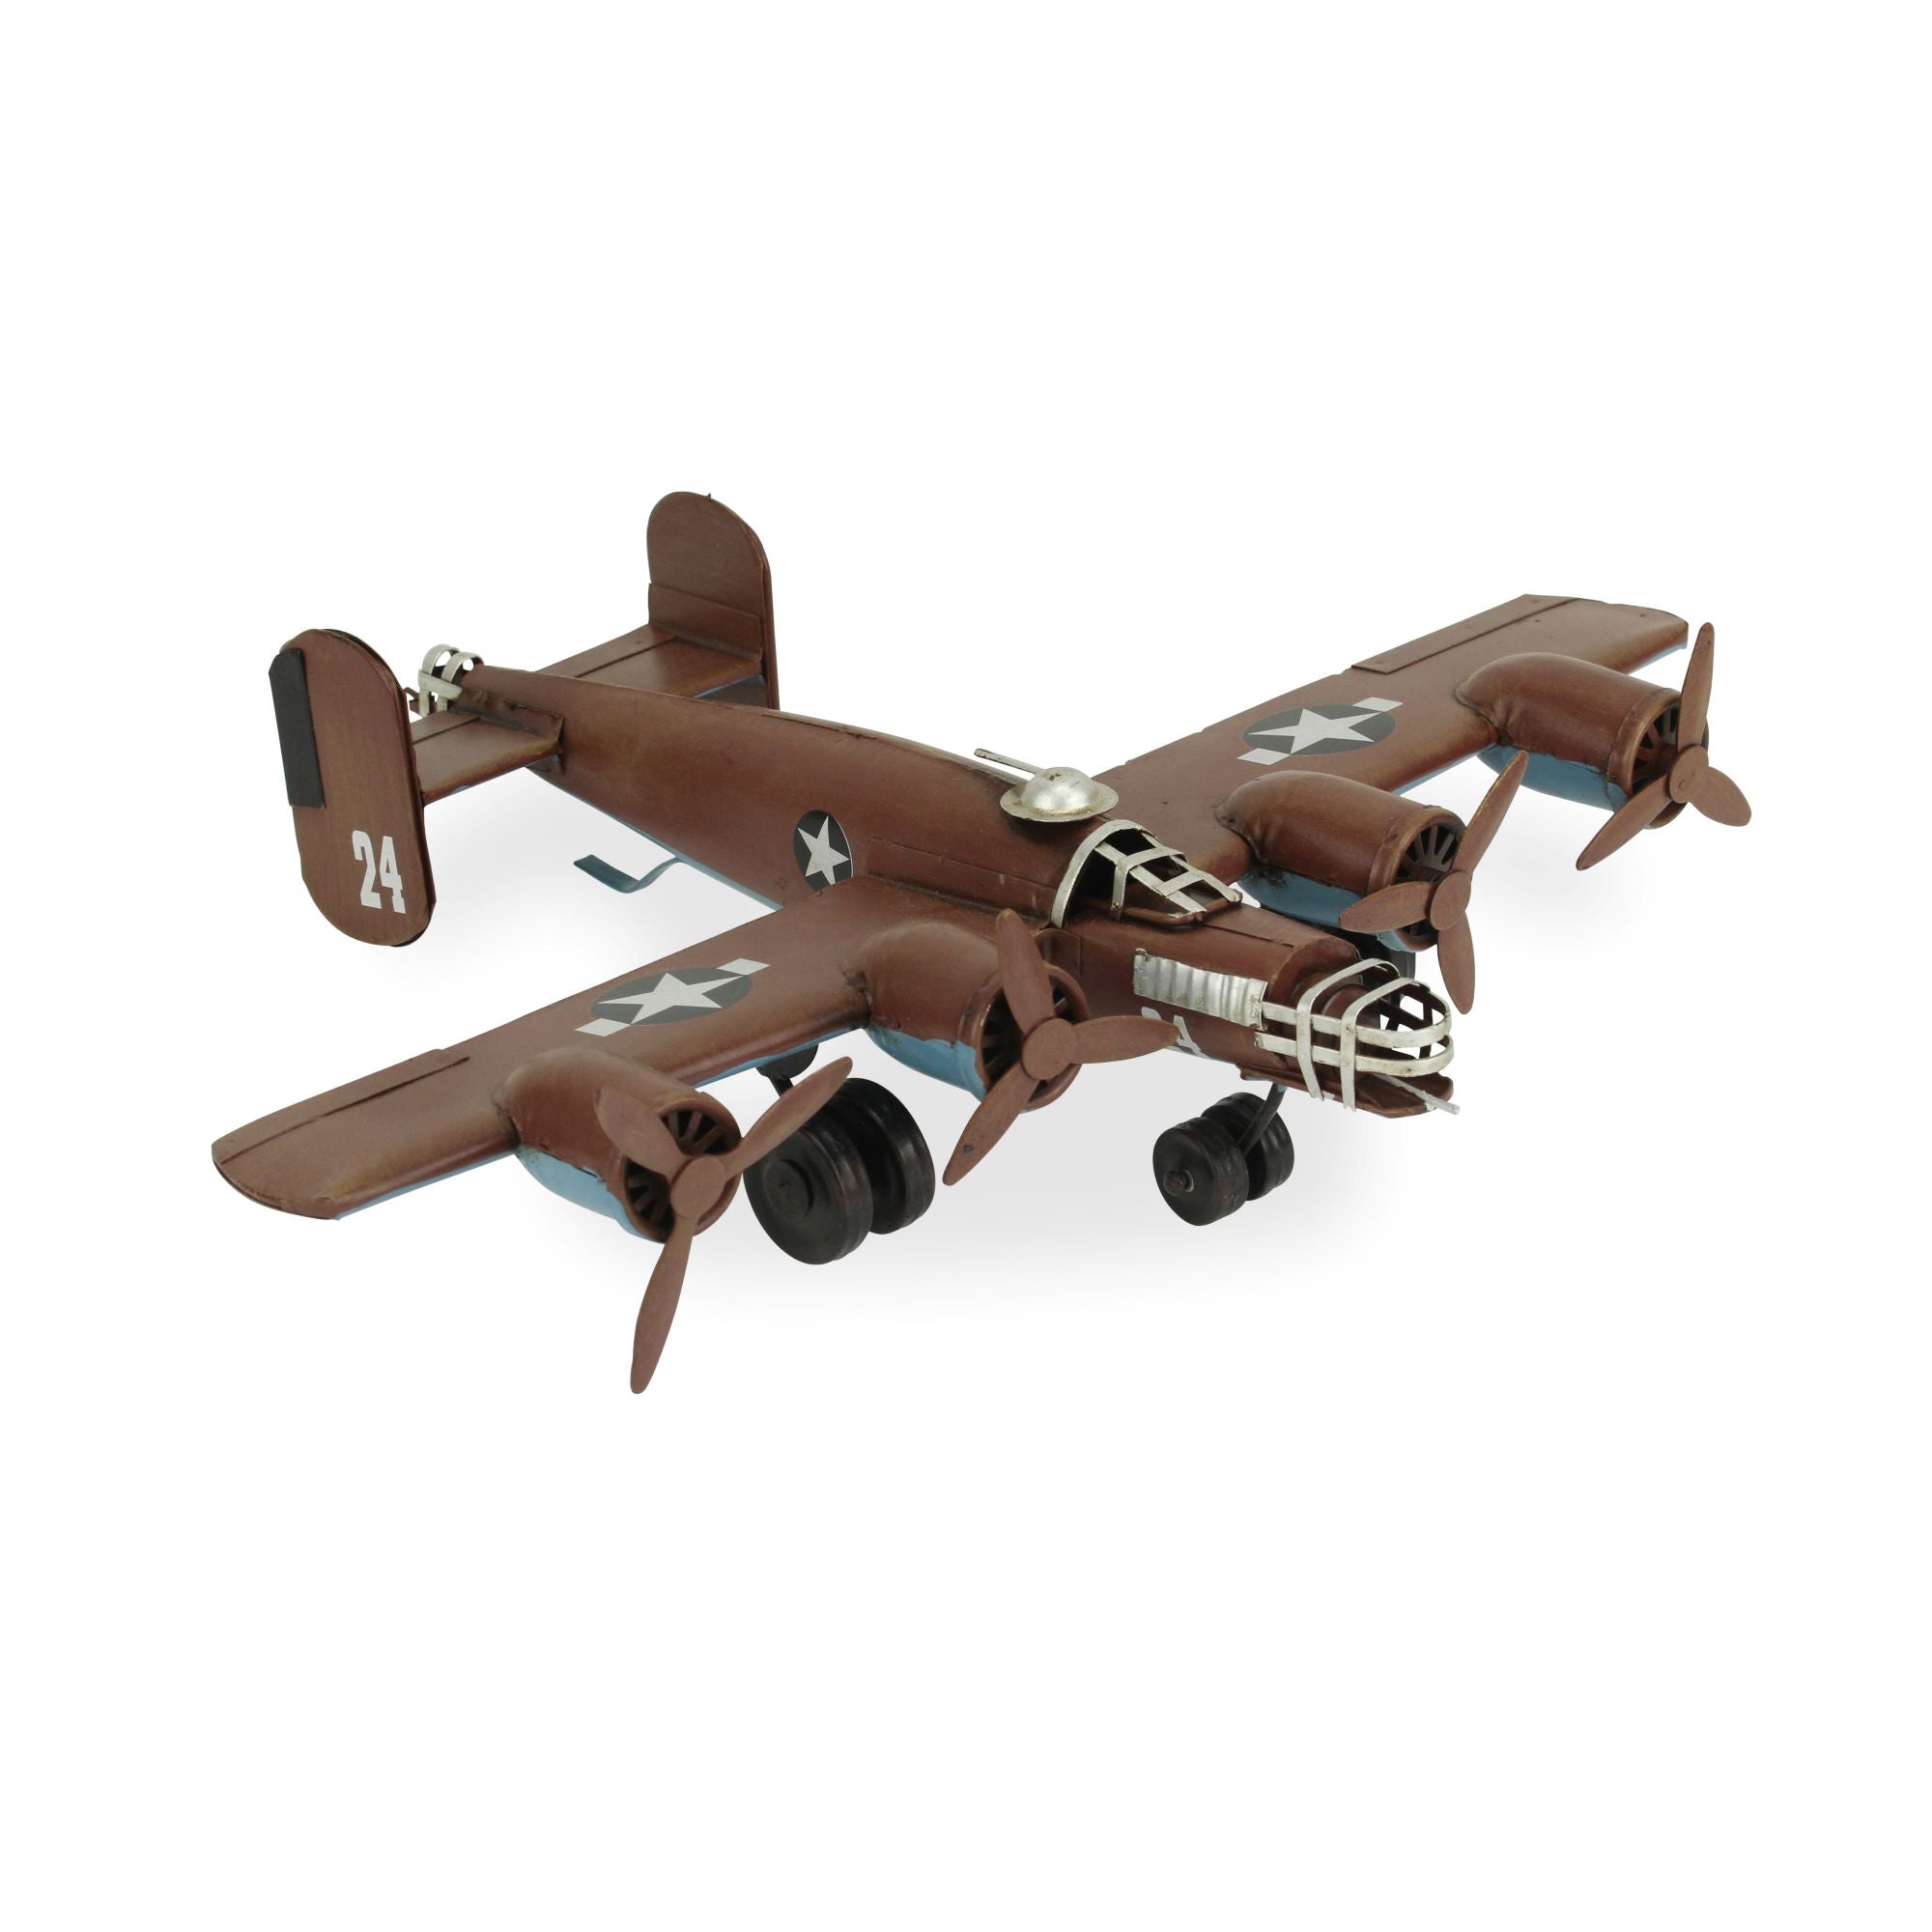 3" Brown and Silver Metal Hand Painted Model Airplane